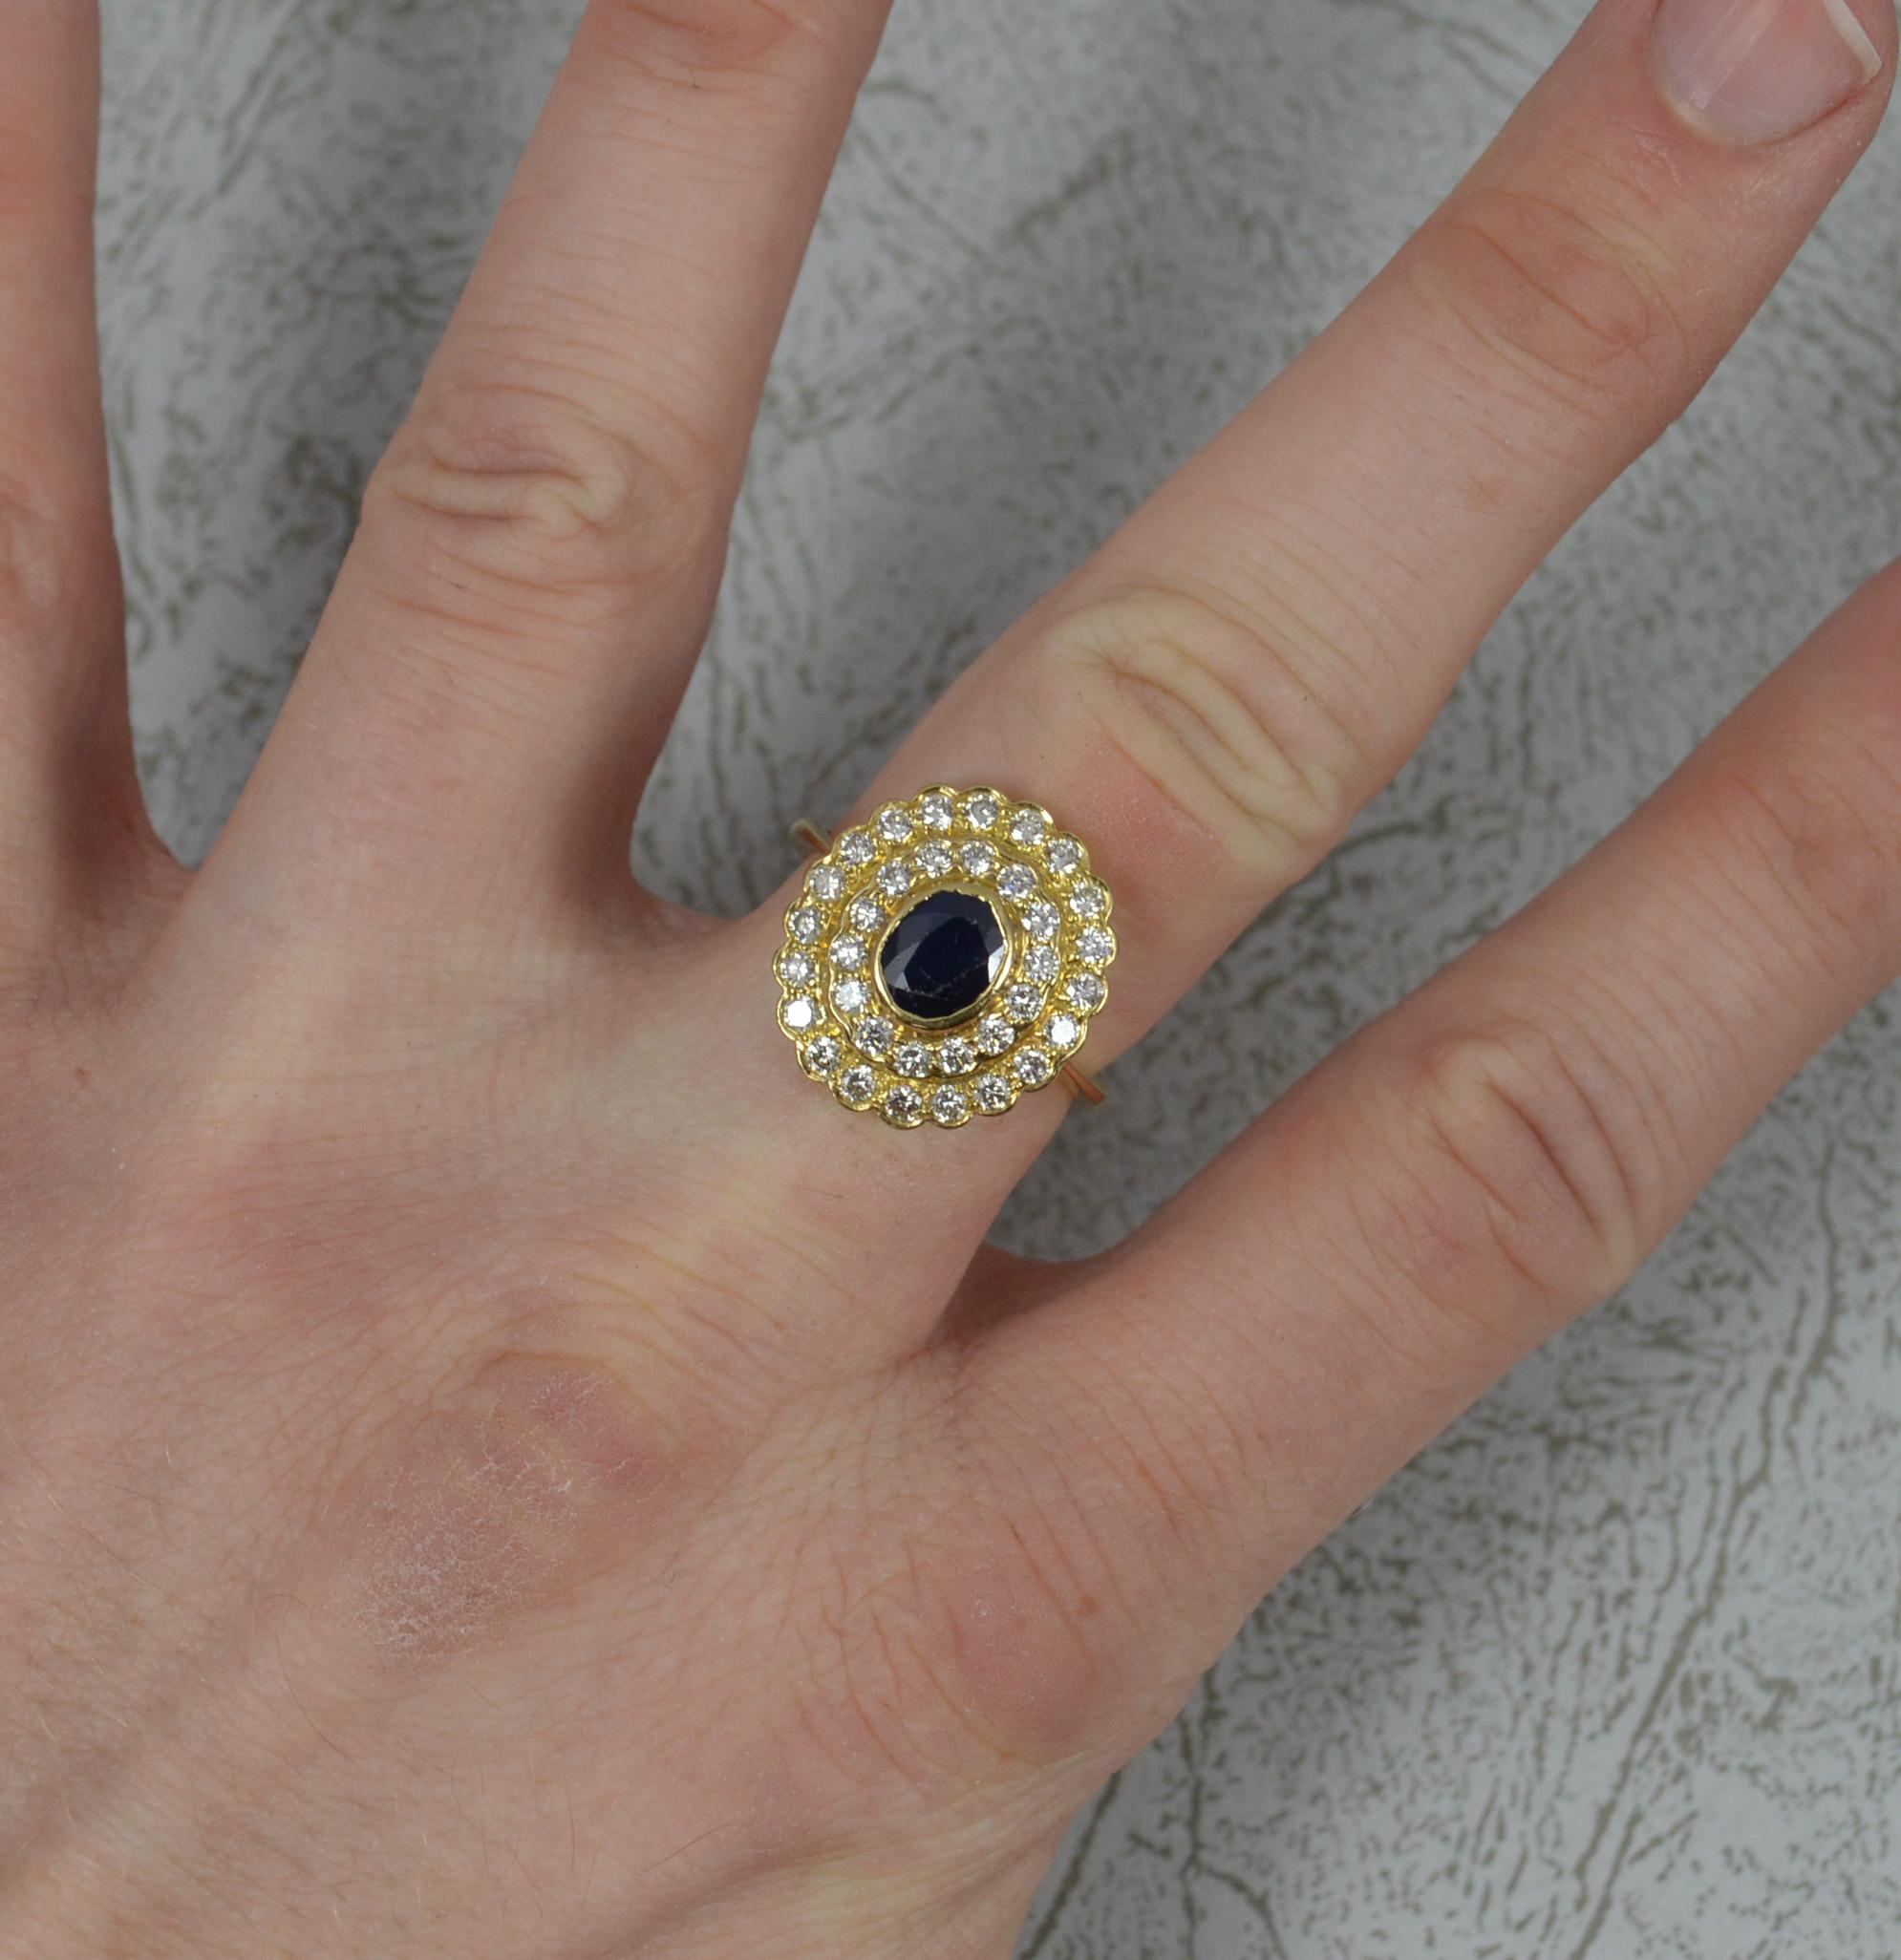 A fantastic Sapphire and Diamond ring.
Solid 18 carat yellow gold shank and head.
Designed with a natural oval cut blue sapphire to centre in full bezel setting. 5.4mm x 6.6mm. Surrounded by two full rows of round brilliant cut diamonds, Vs clarity.